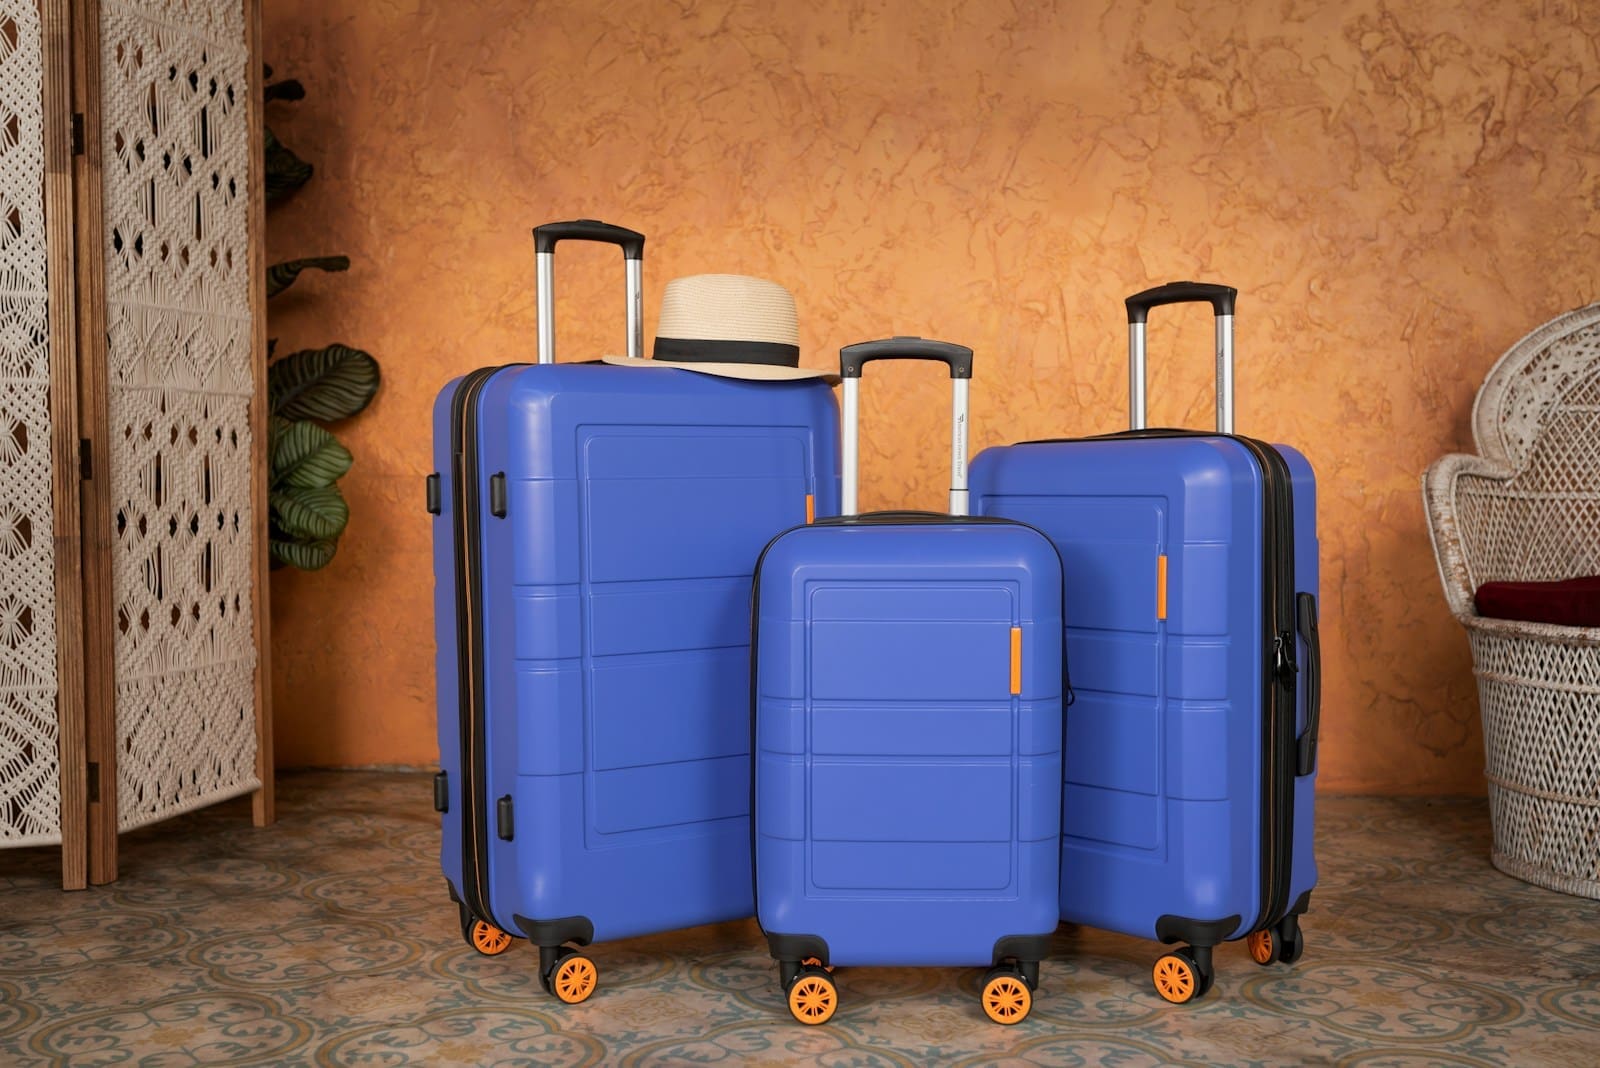 The Ultimate Guide to Choosing the Best Check-In Luggage for International Travel